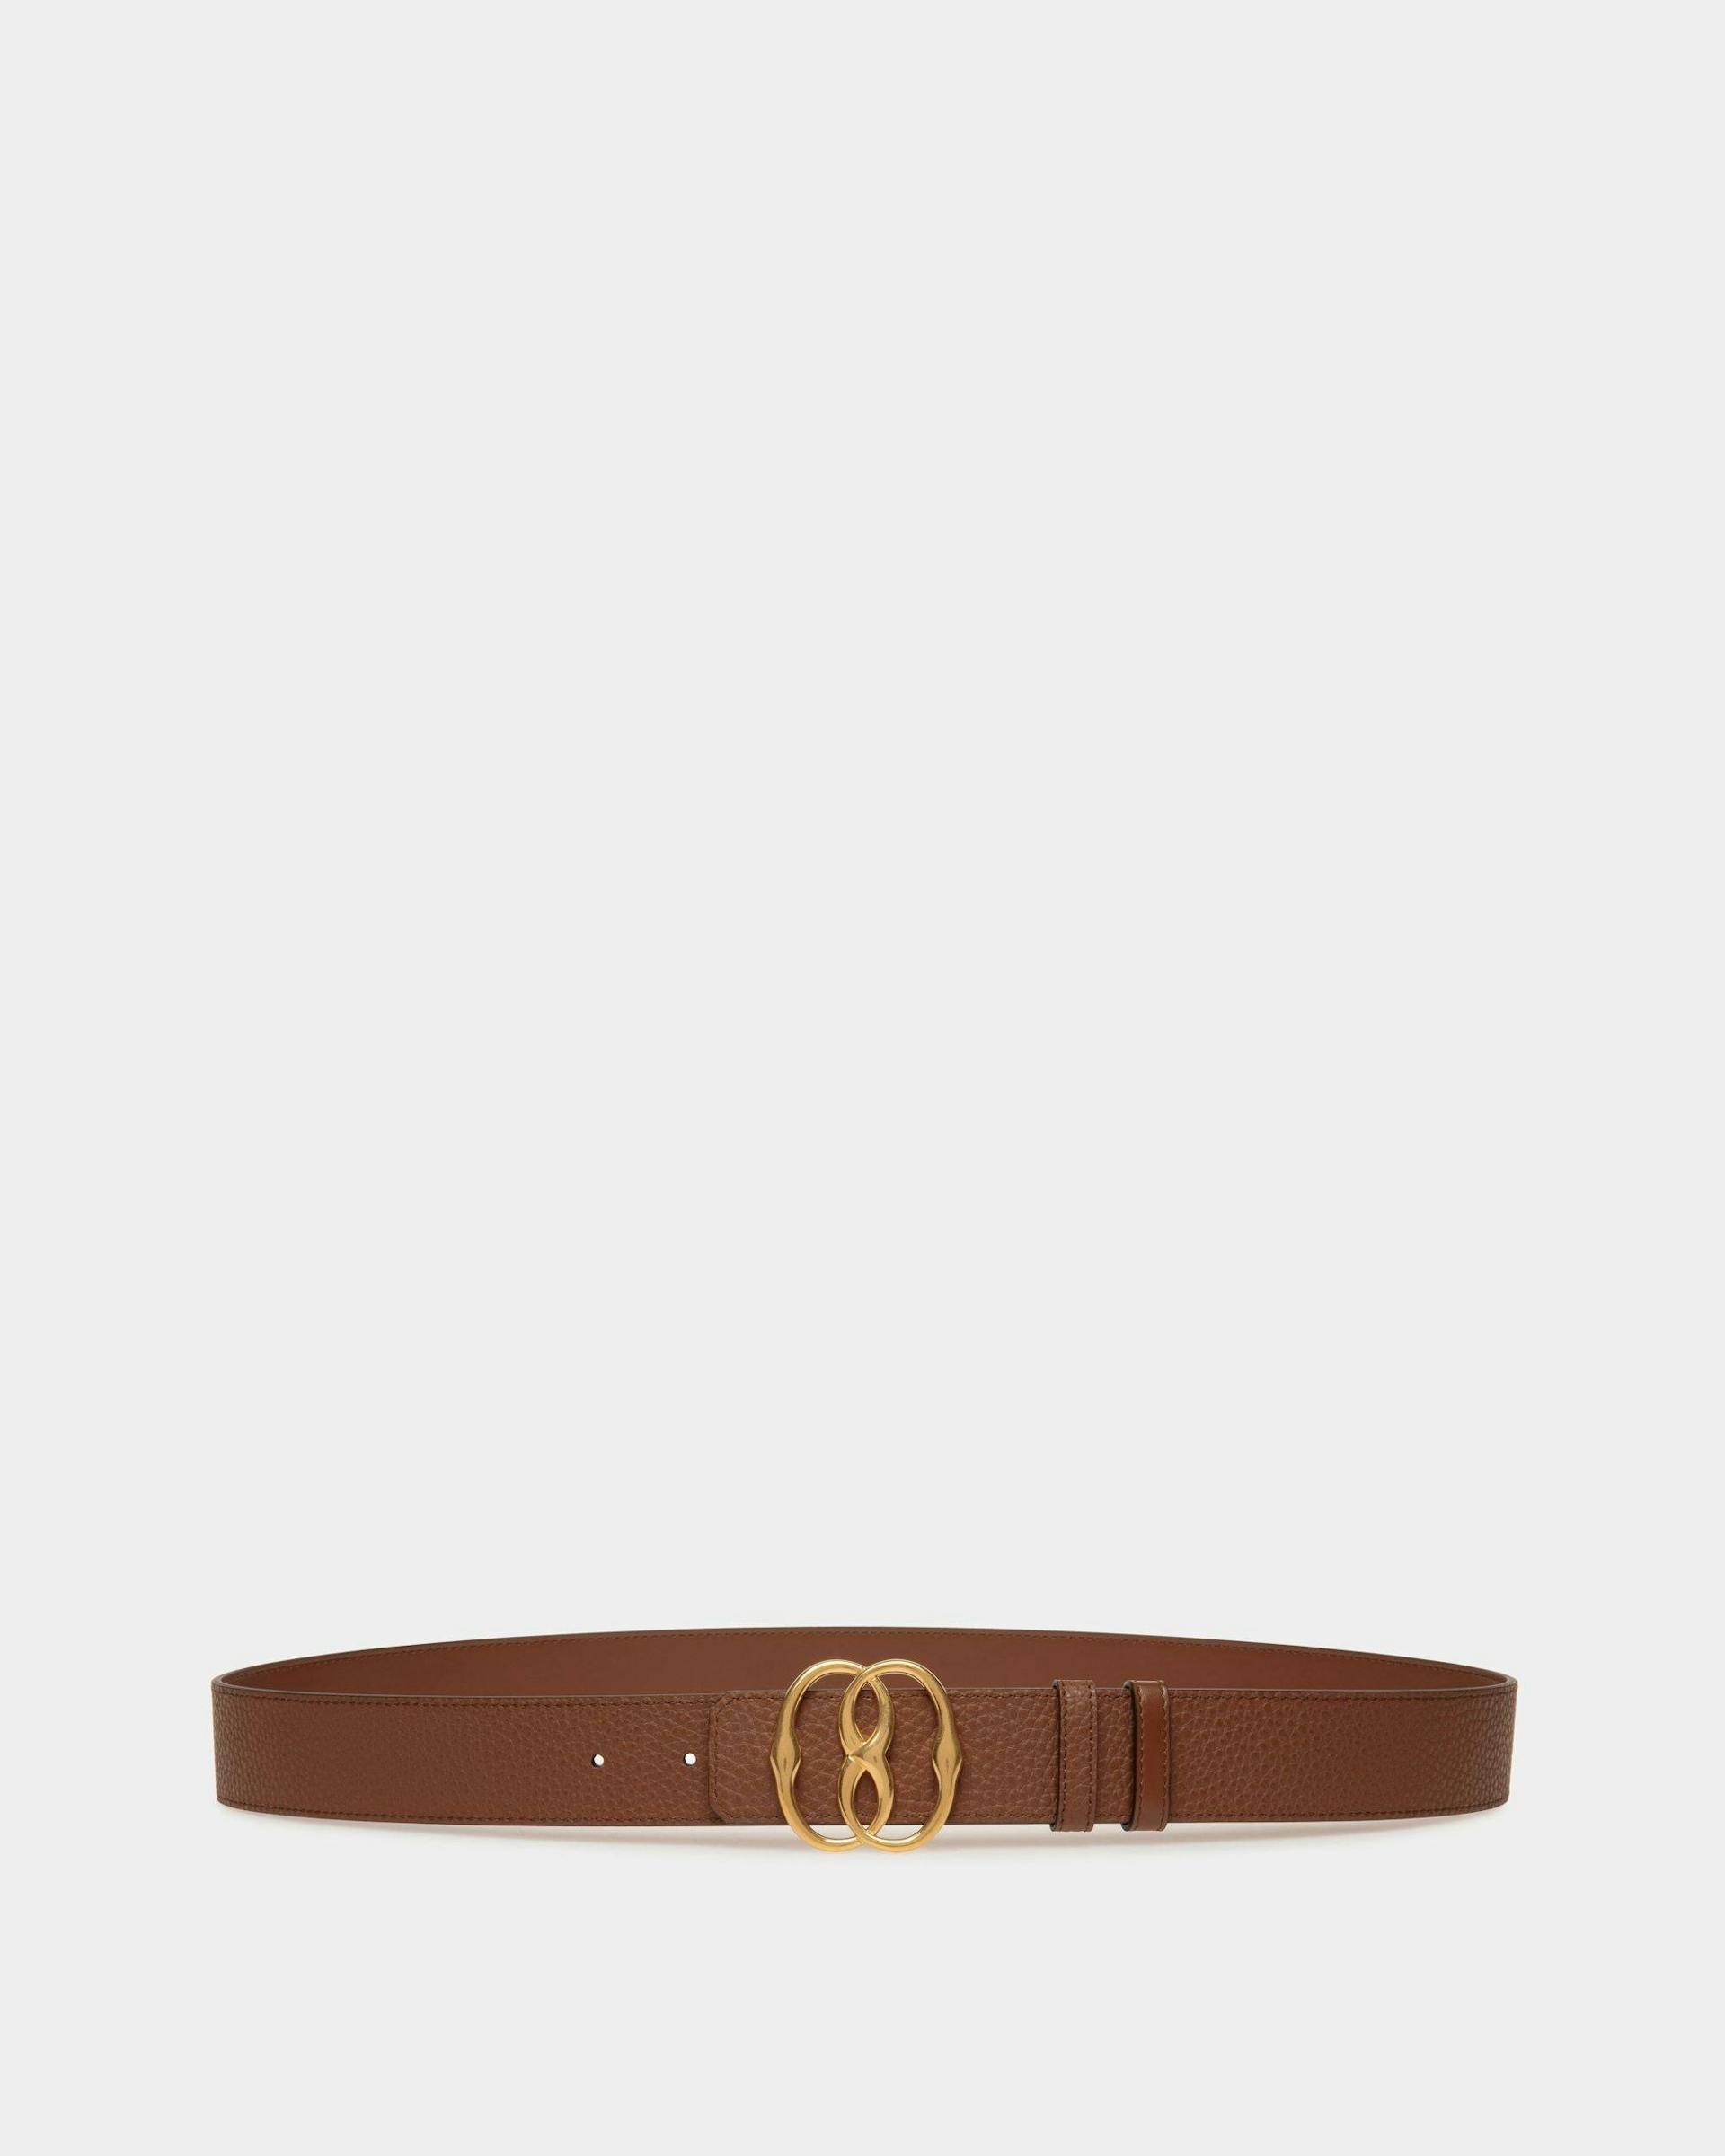 Bally Iconic 35mm Belt In Brown Leather - Men's - Bally - 01